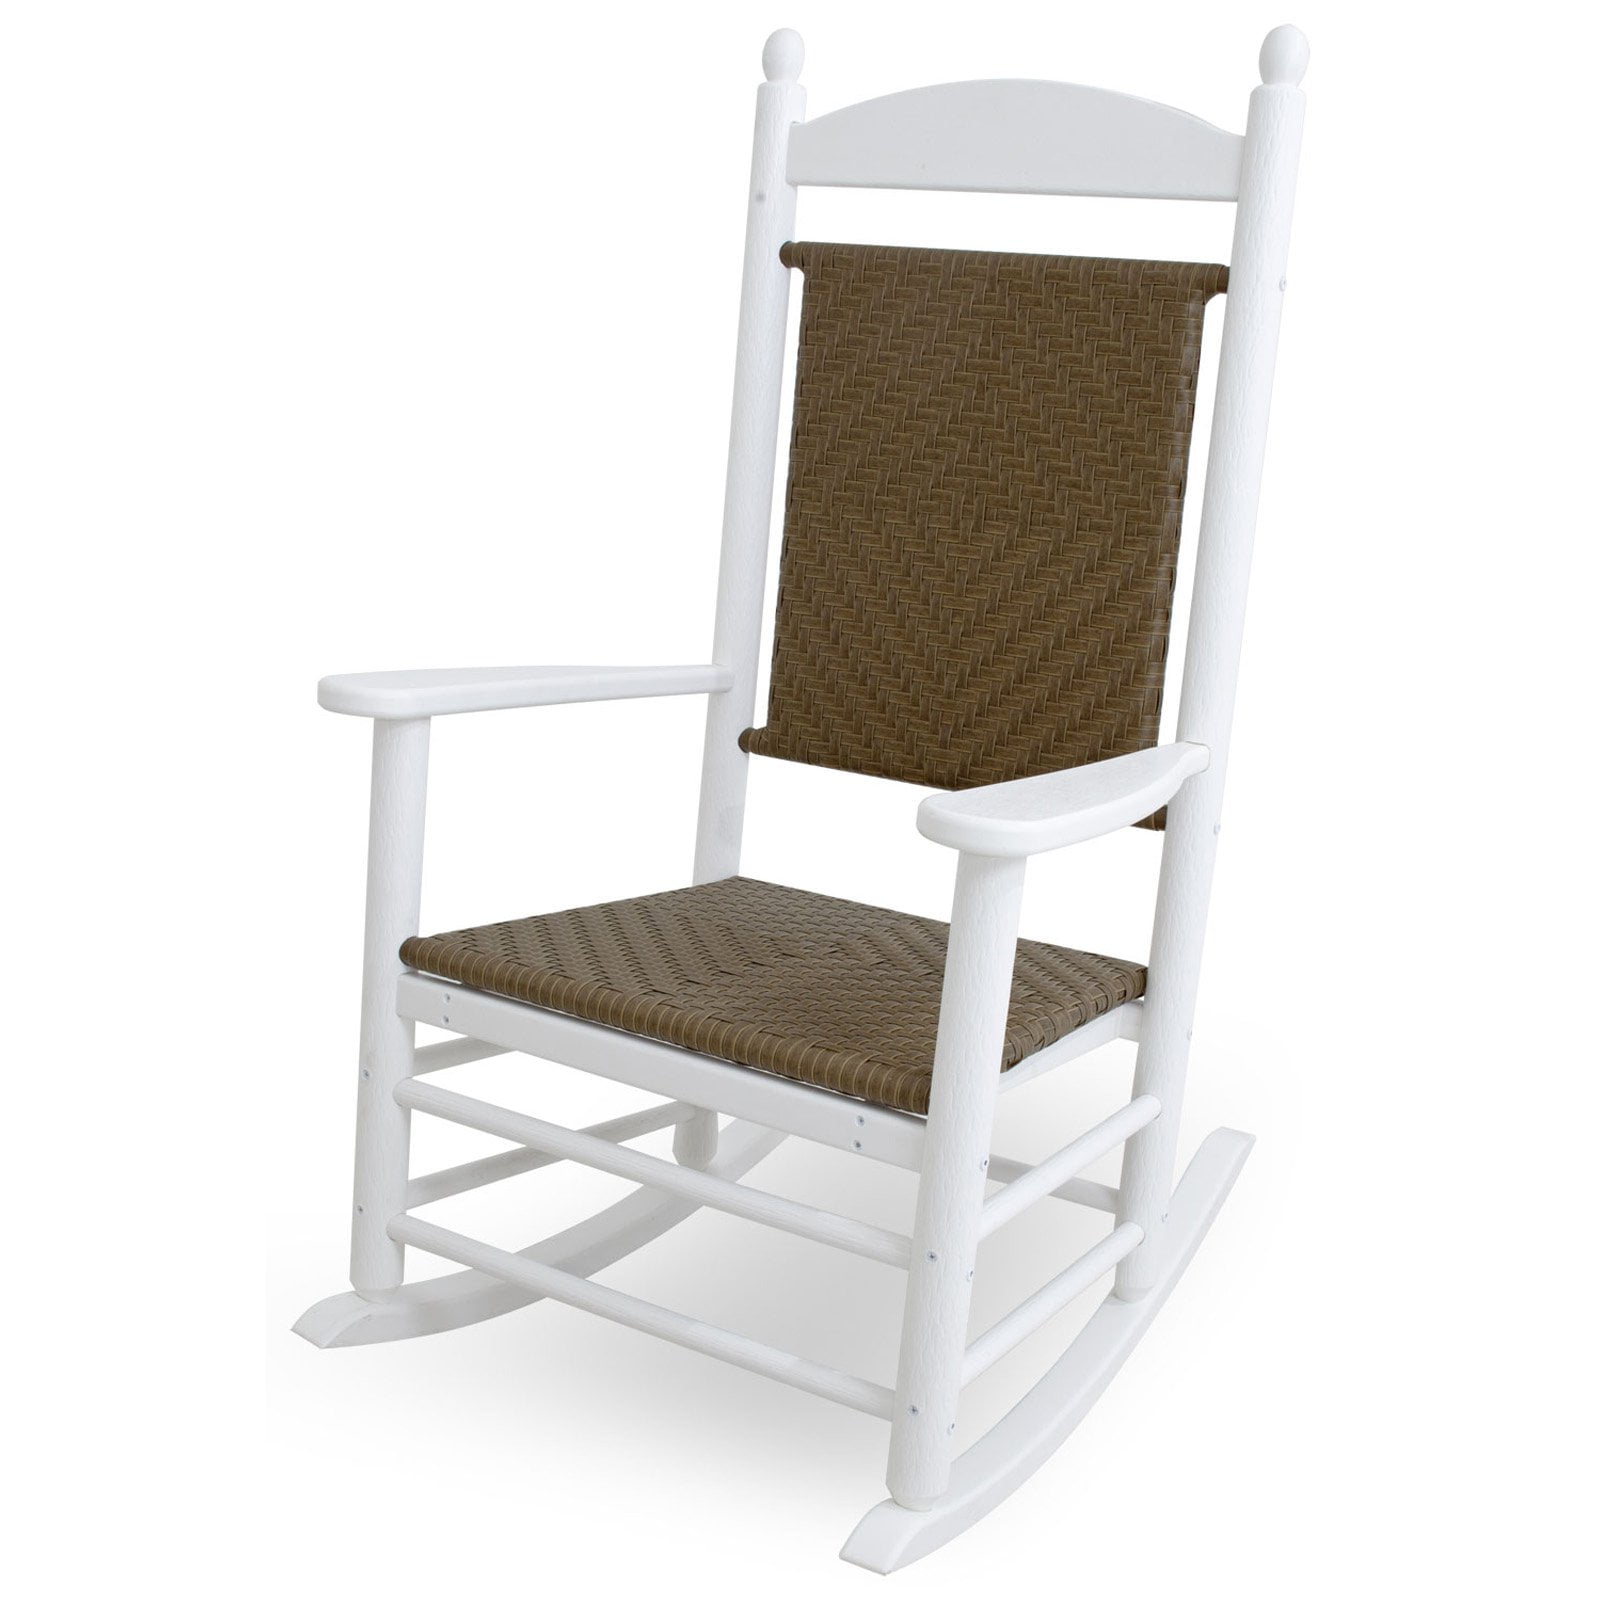 POLYWOOD® Jefferson Recycled Plastic Rocking Chair with Woven Seat and
Back - Walmart.com